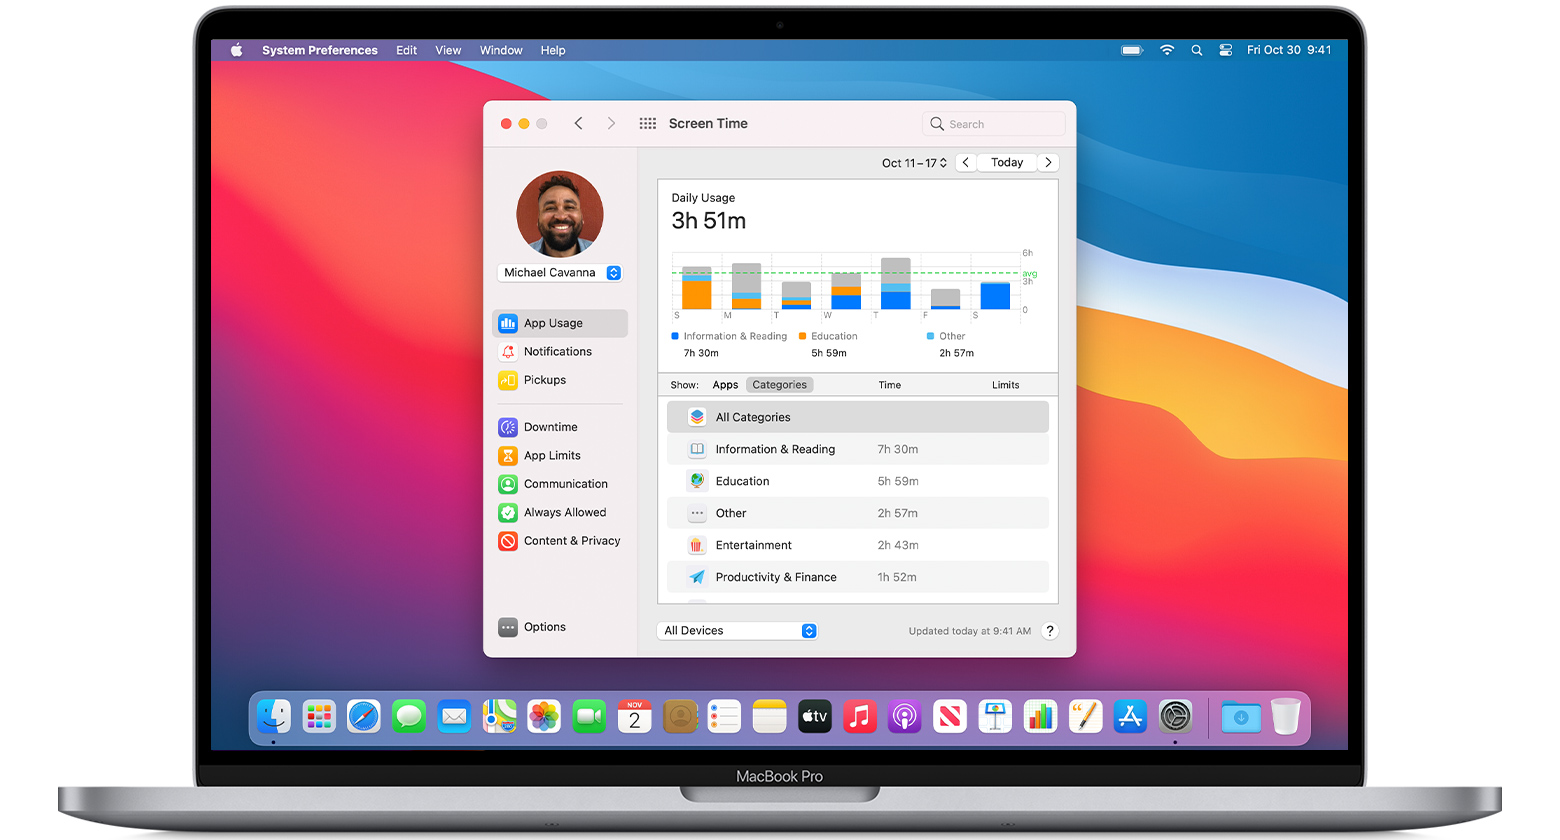 time control software for mac